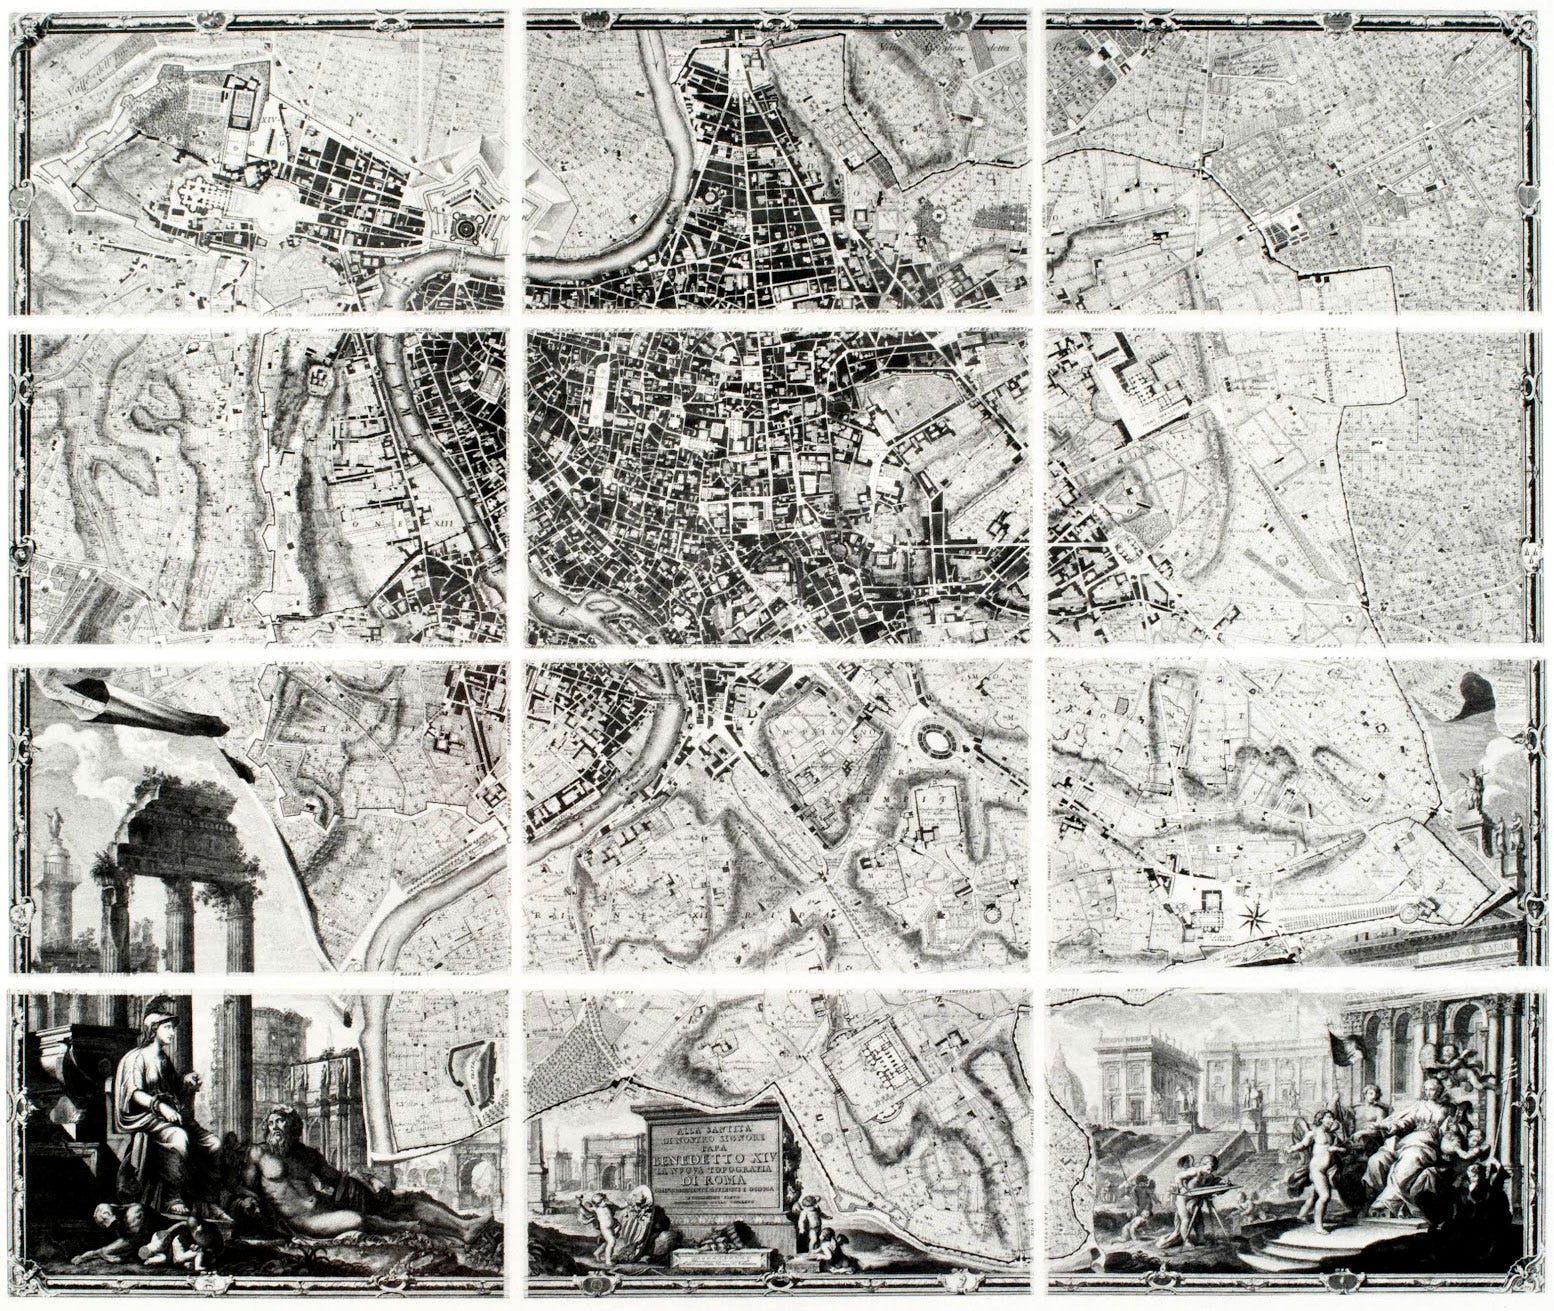 The Nolli map on 12 copper plates